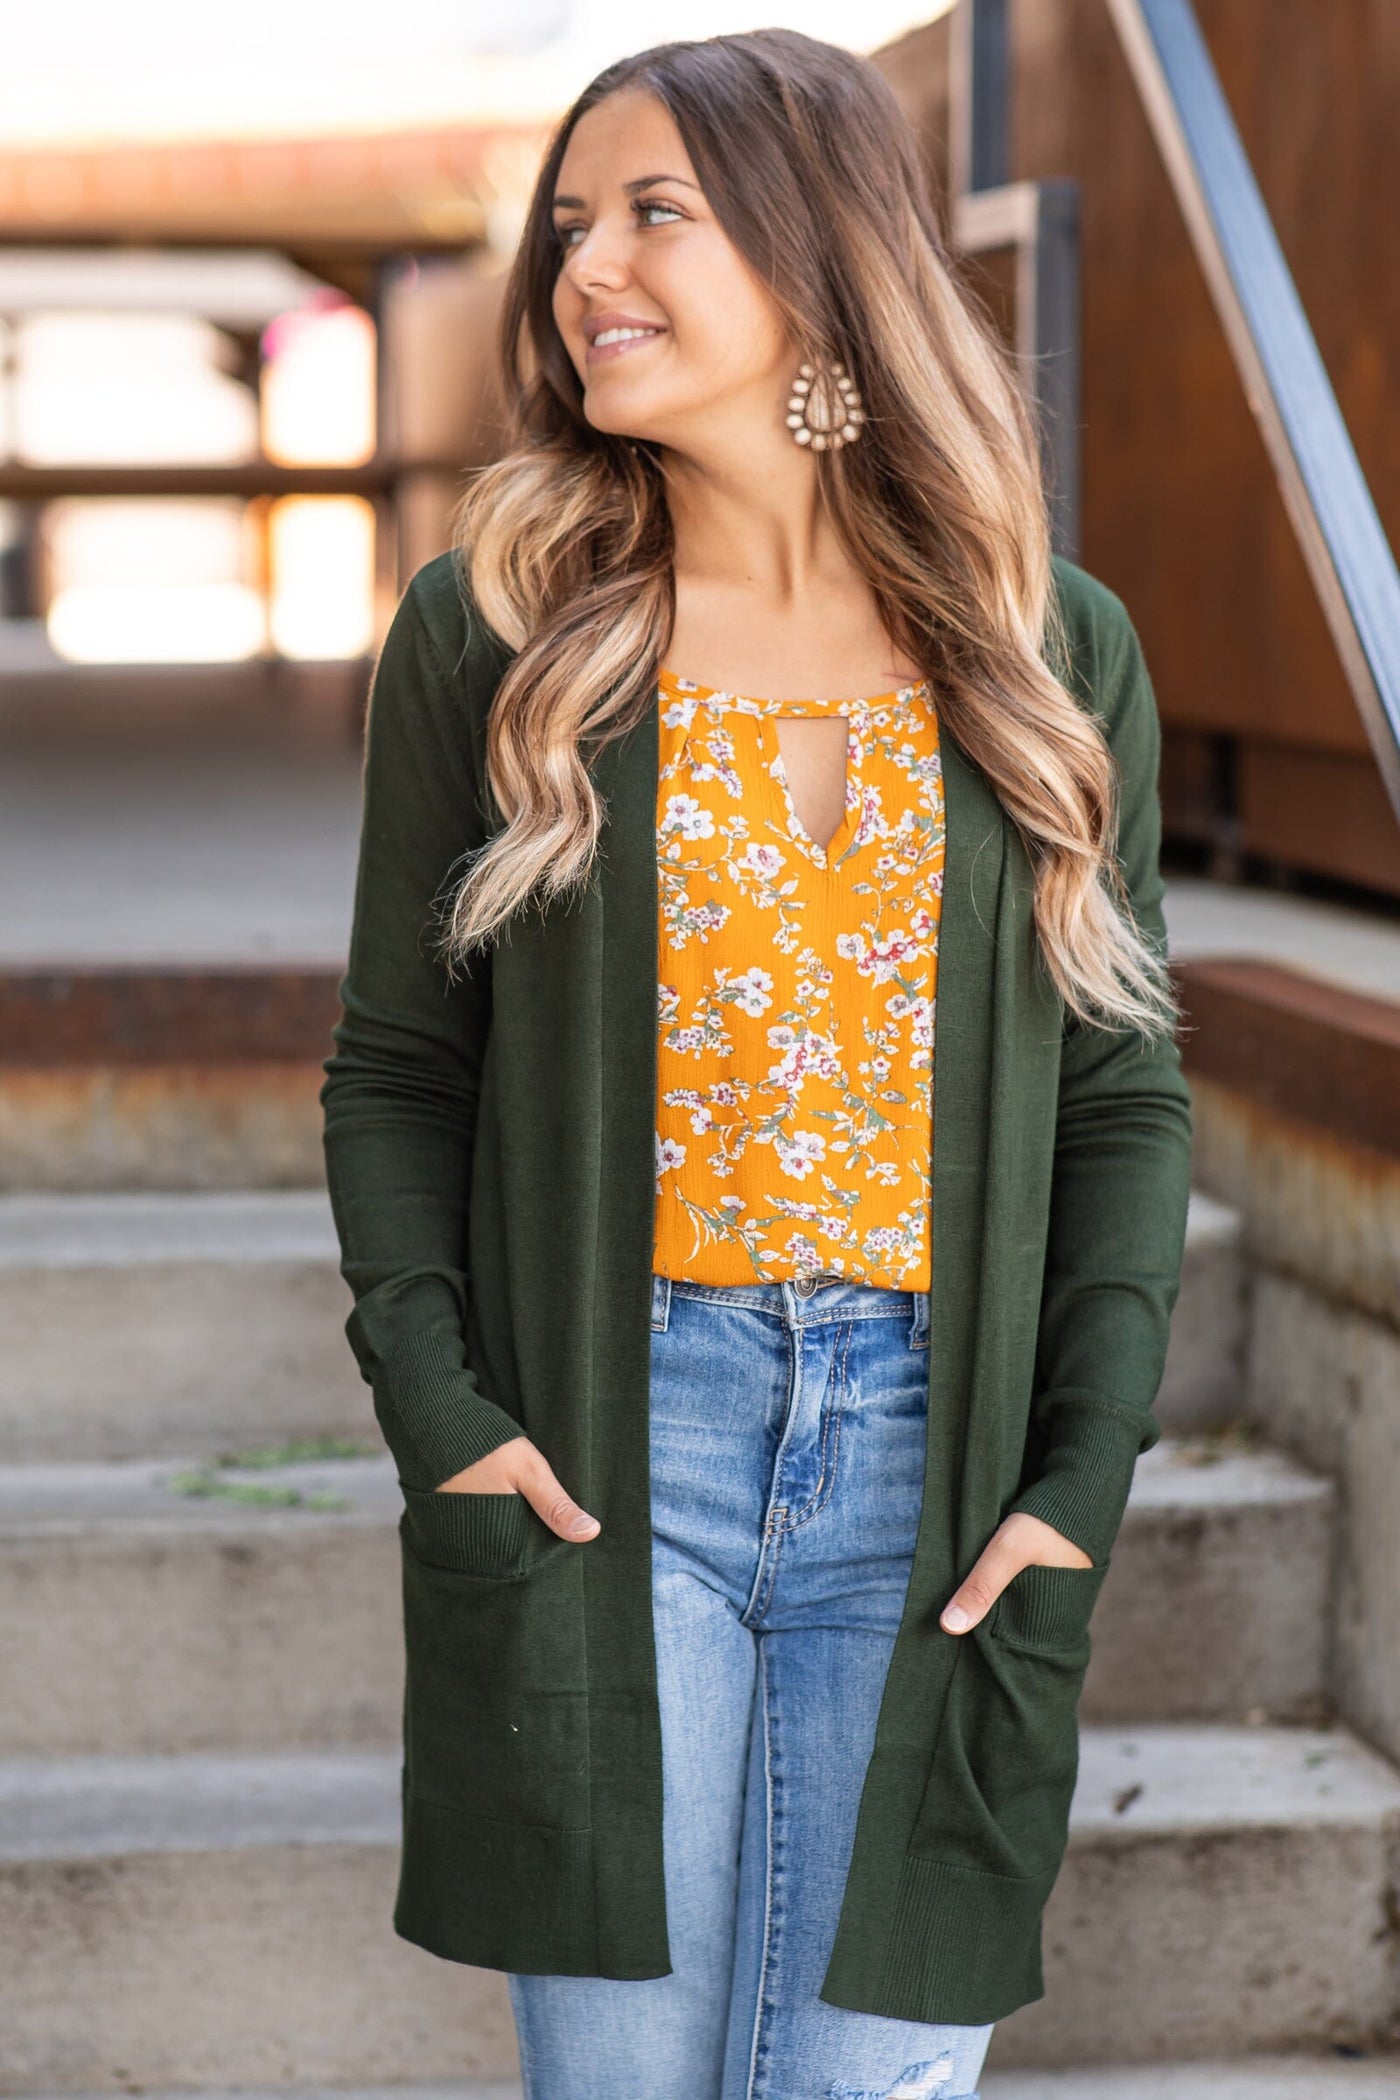 Olive Lightweight Mid Length Cardigan - Filly Flair